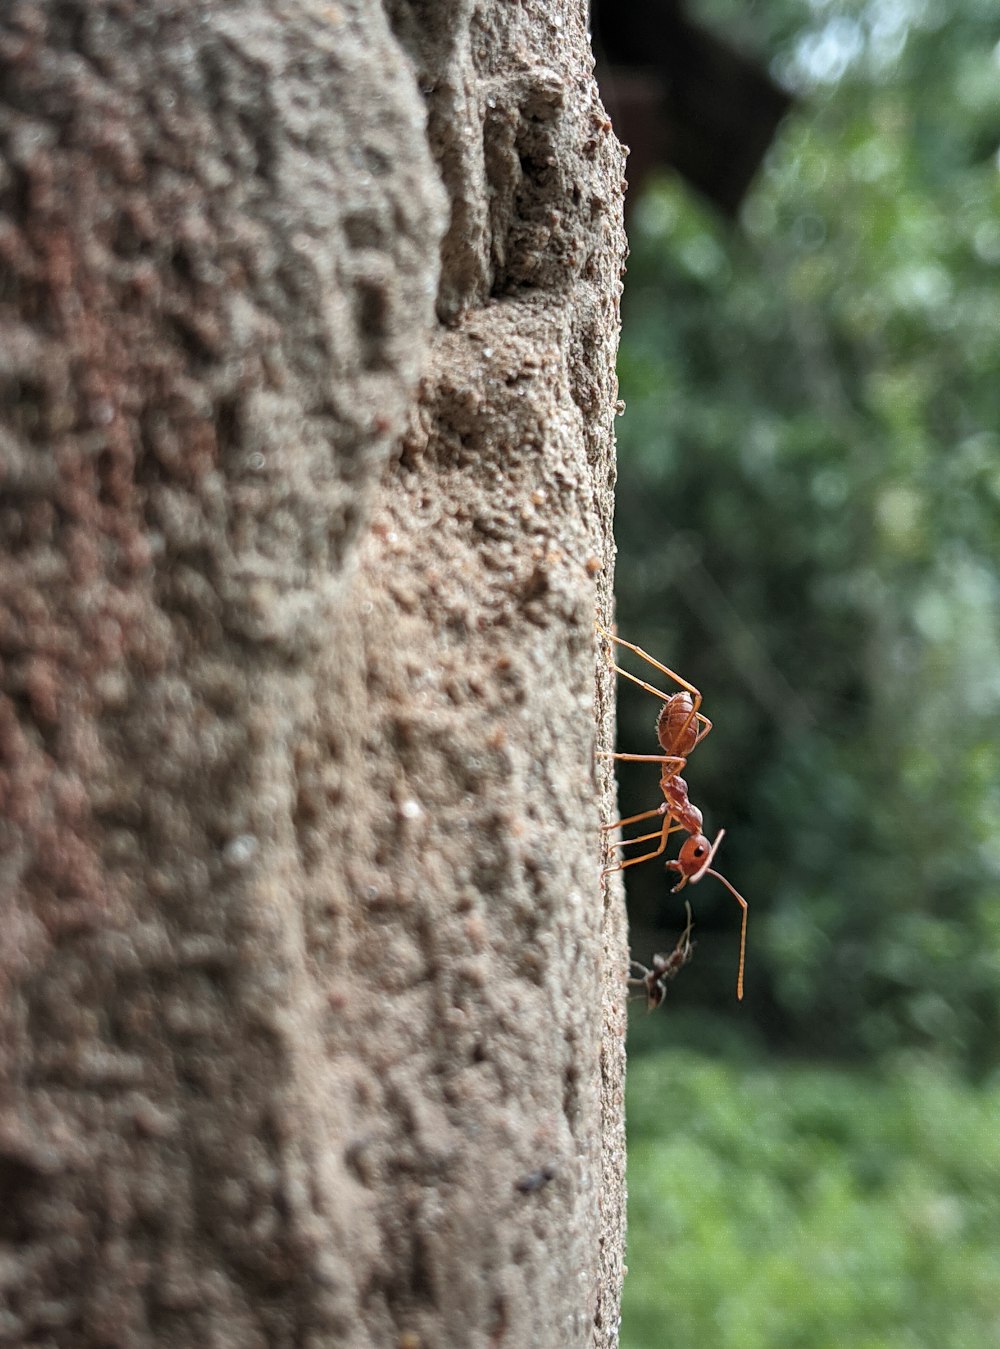 a red ant standing on the side of a tree